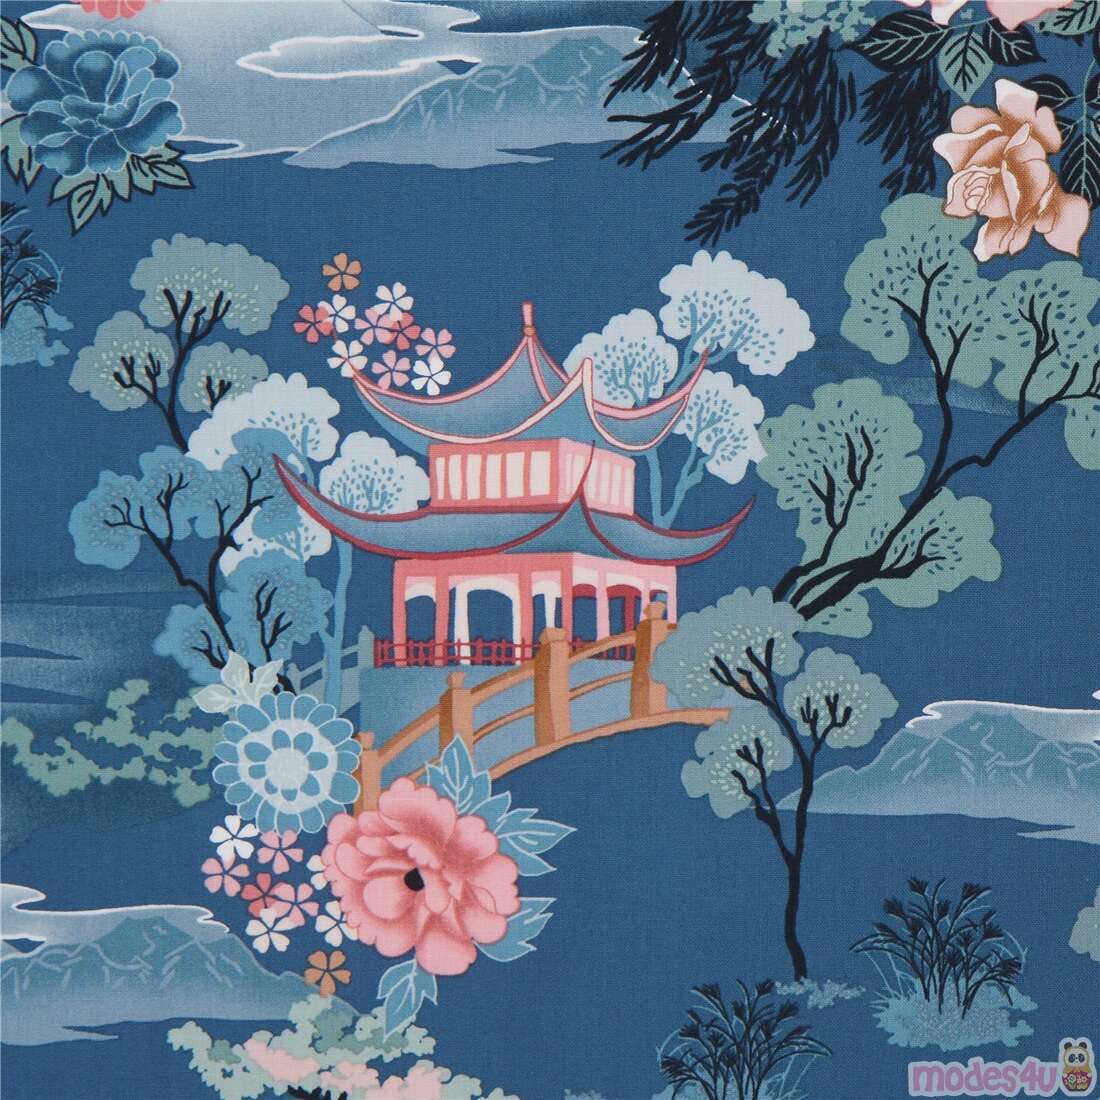 teal Japanese pagoda fabric with peonies and roses by Michael Miller ...